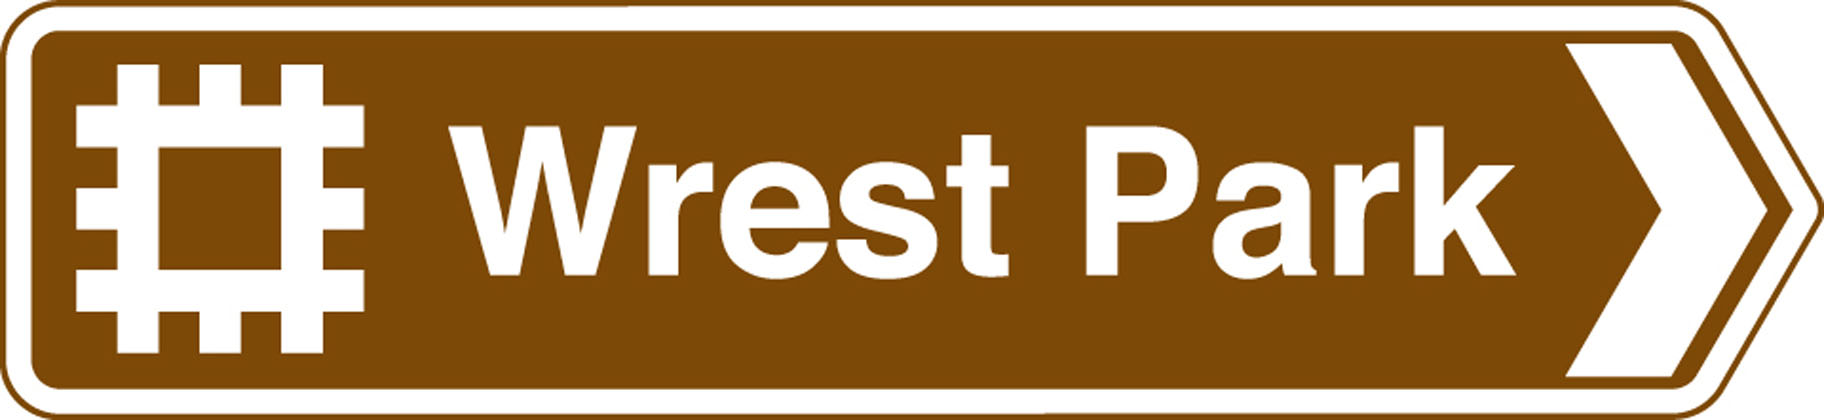 direction-sign-other-english-heritage